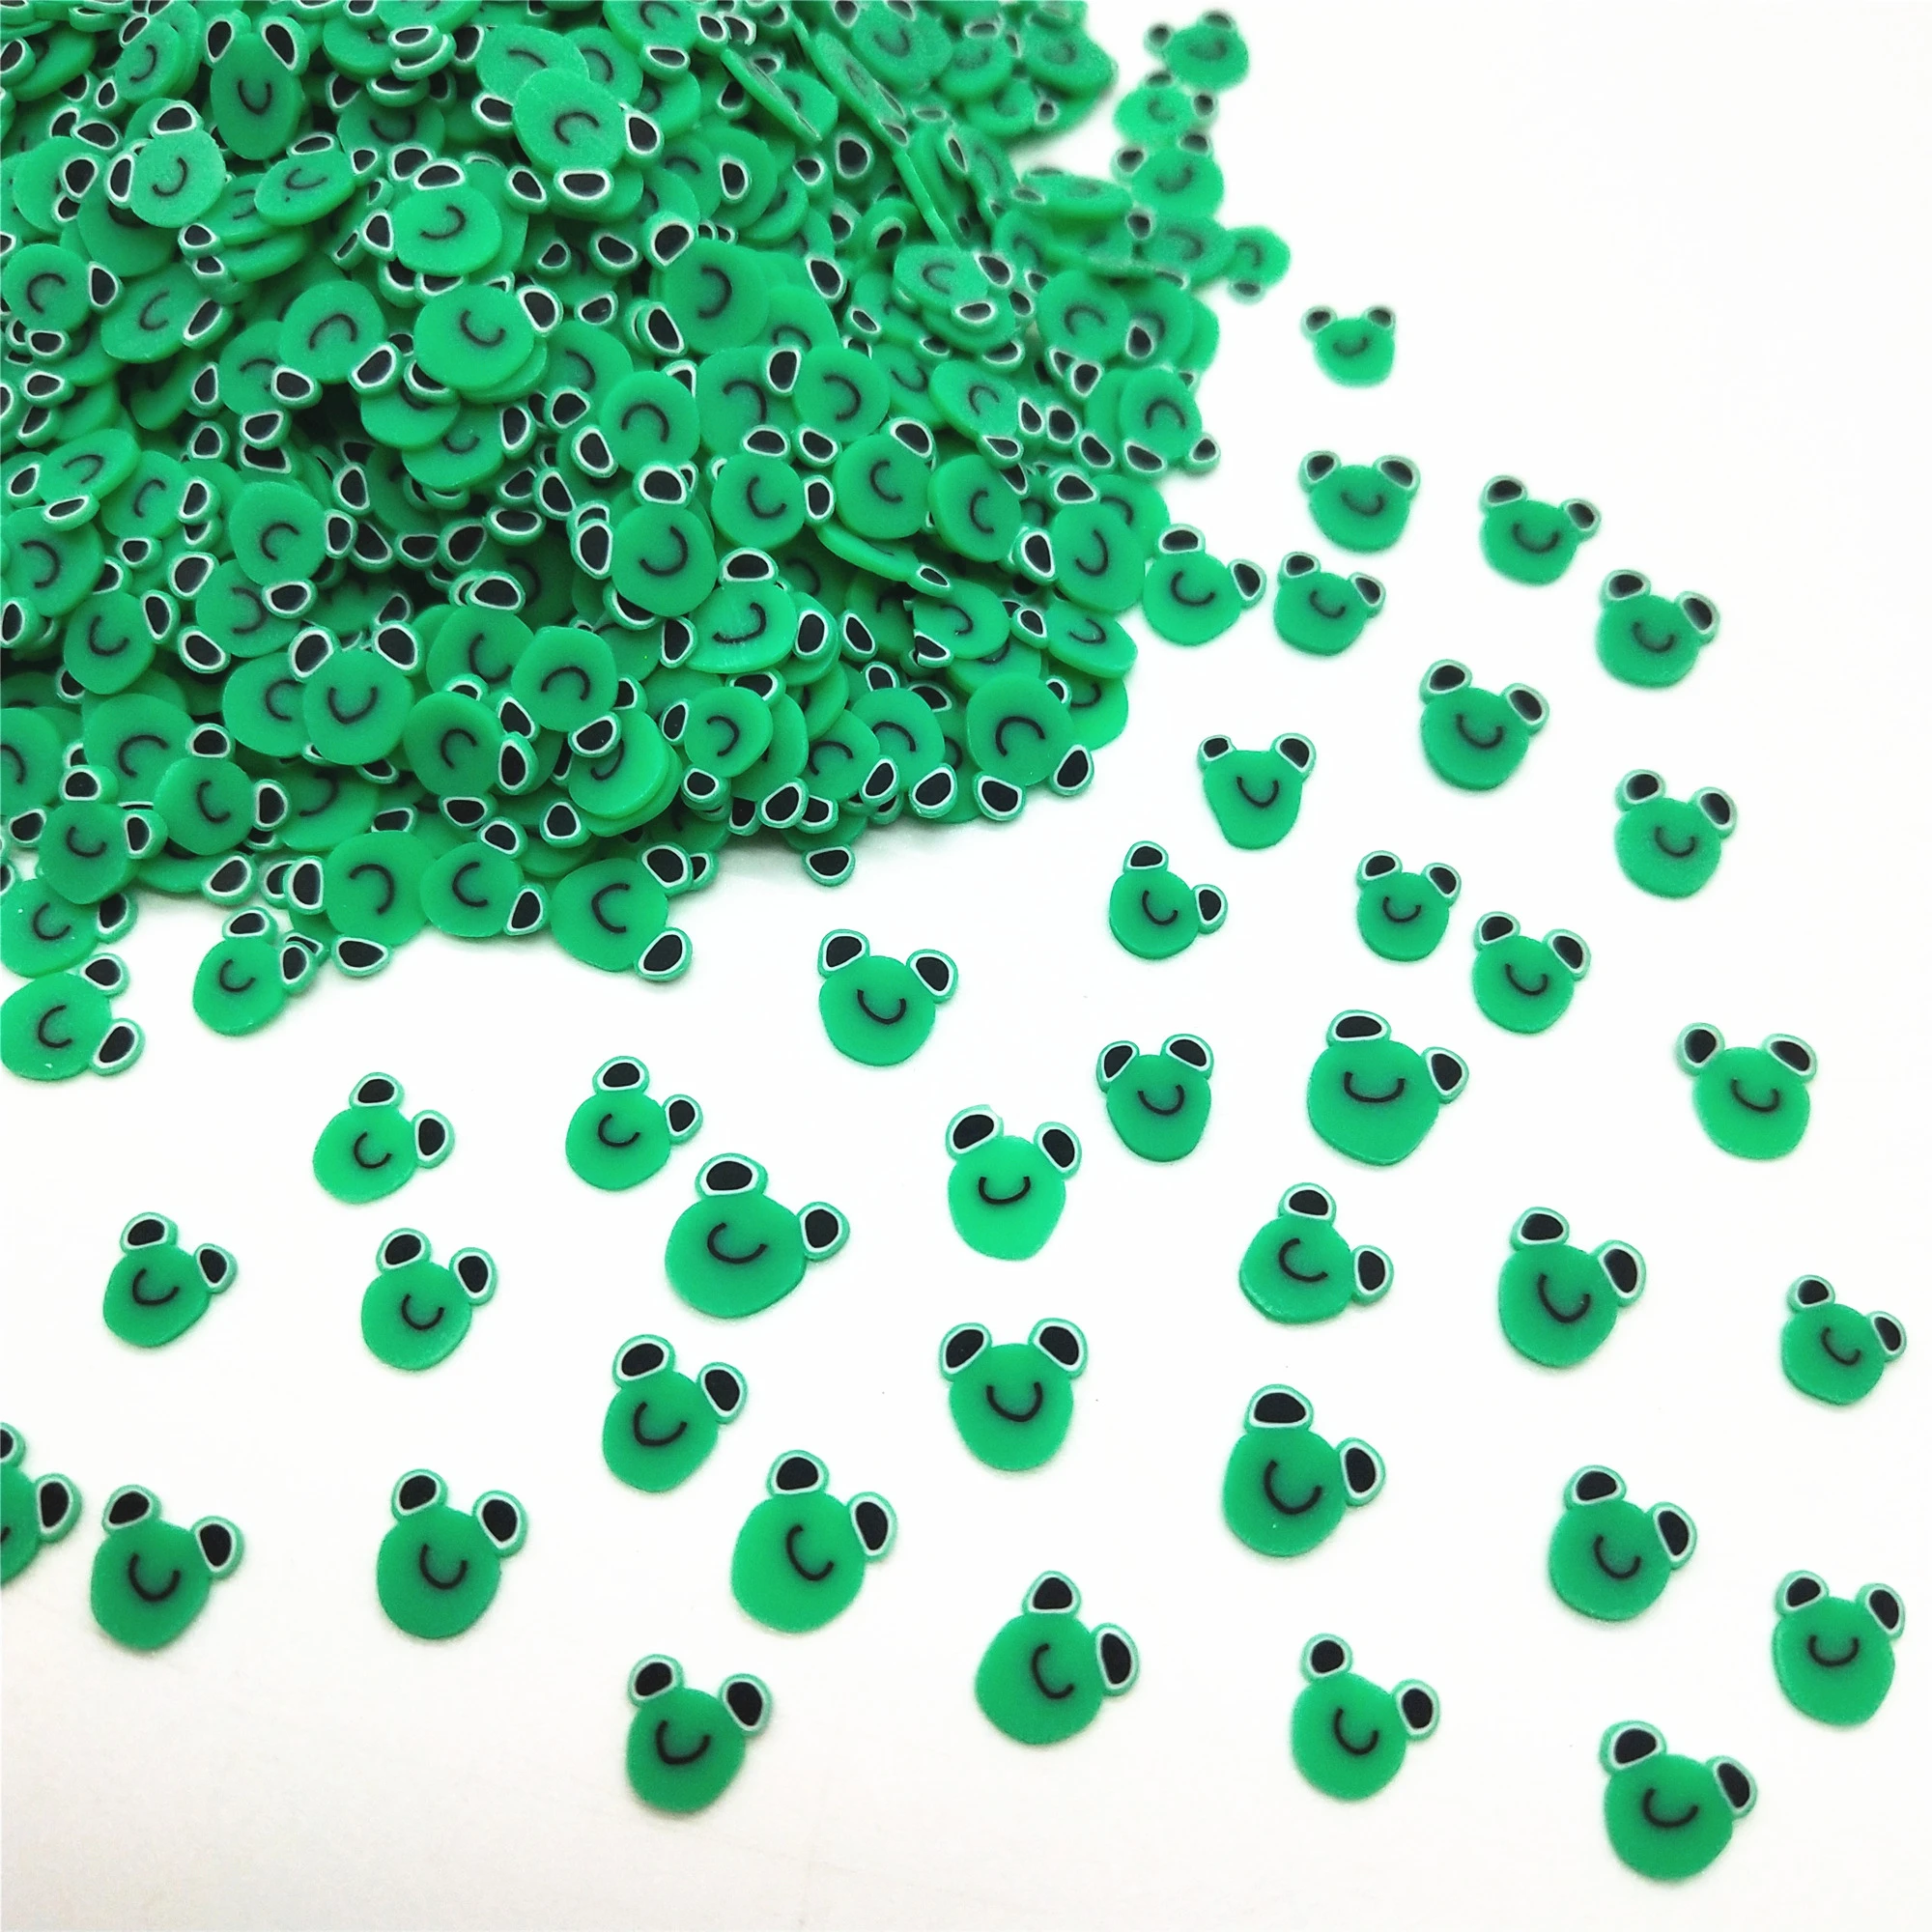 20g/lot Green Frog Polymer Clay Slices for DIY Crafts 5mm Plastic Klei Mud Particles Animal Clays